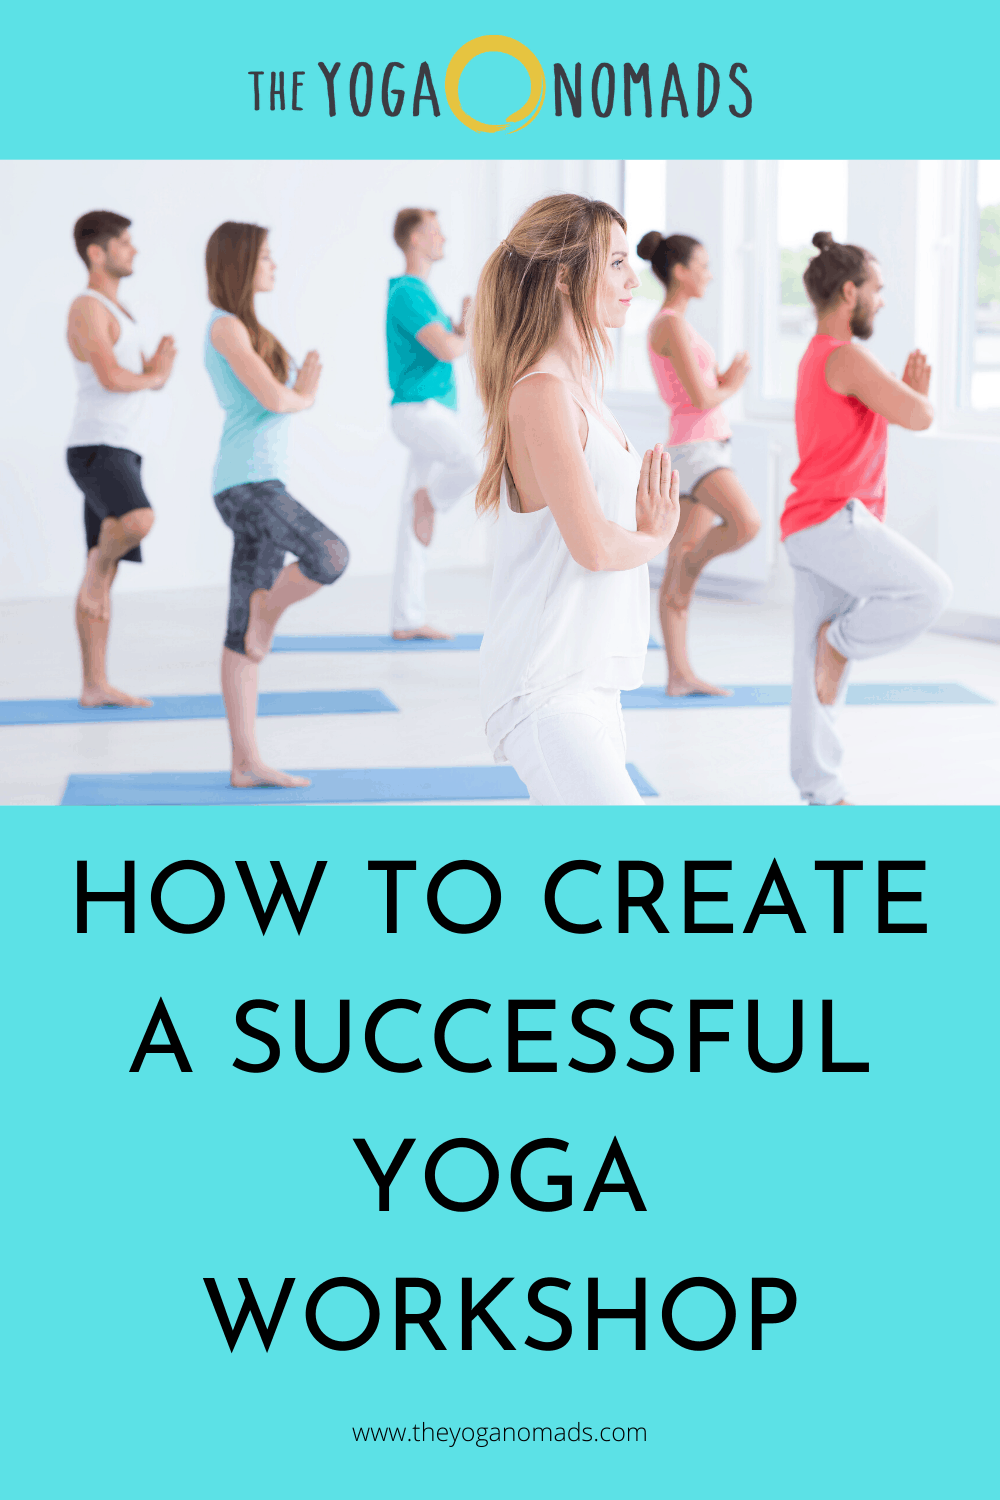 How To Create A Successful Yoga Workshop